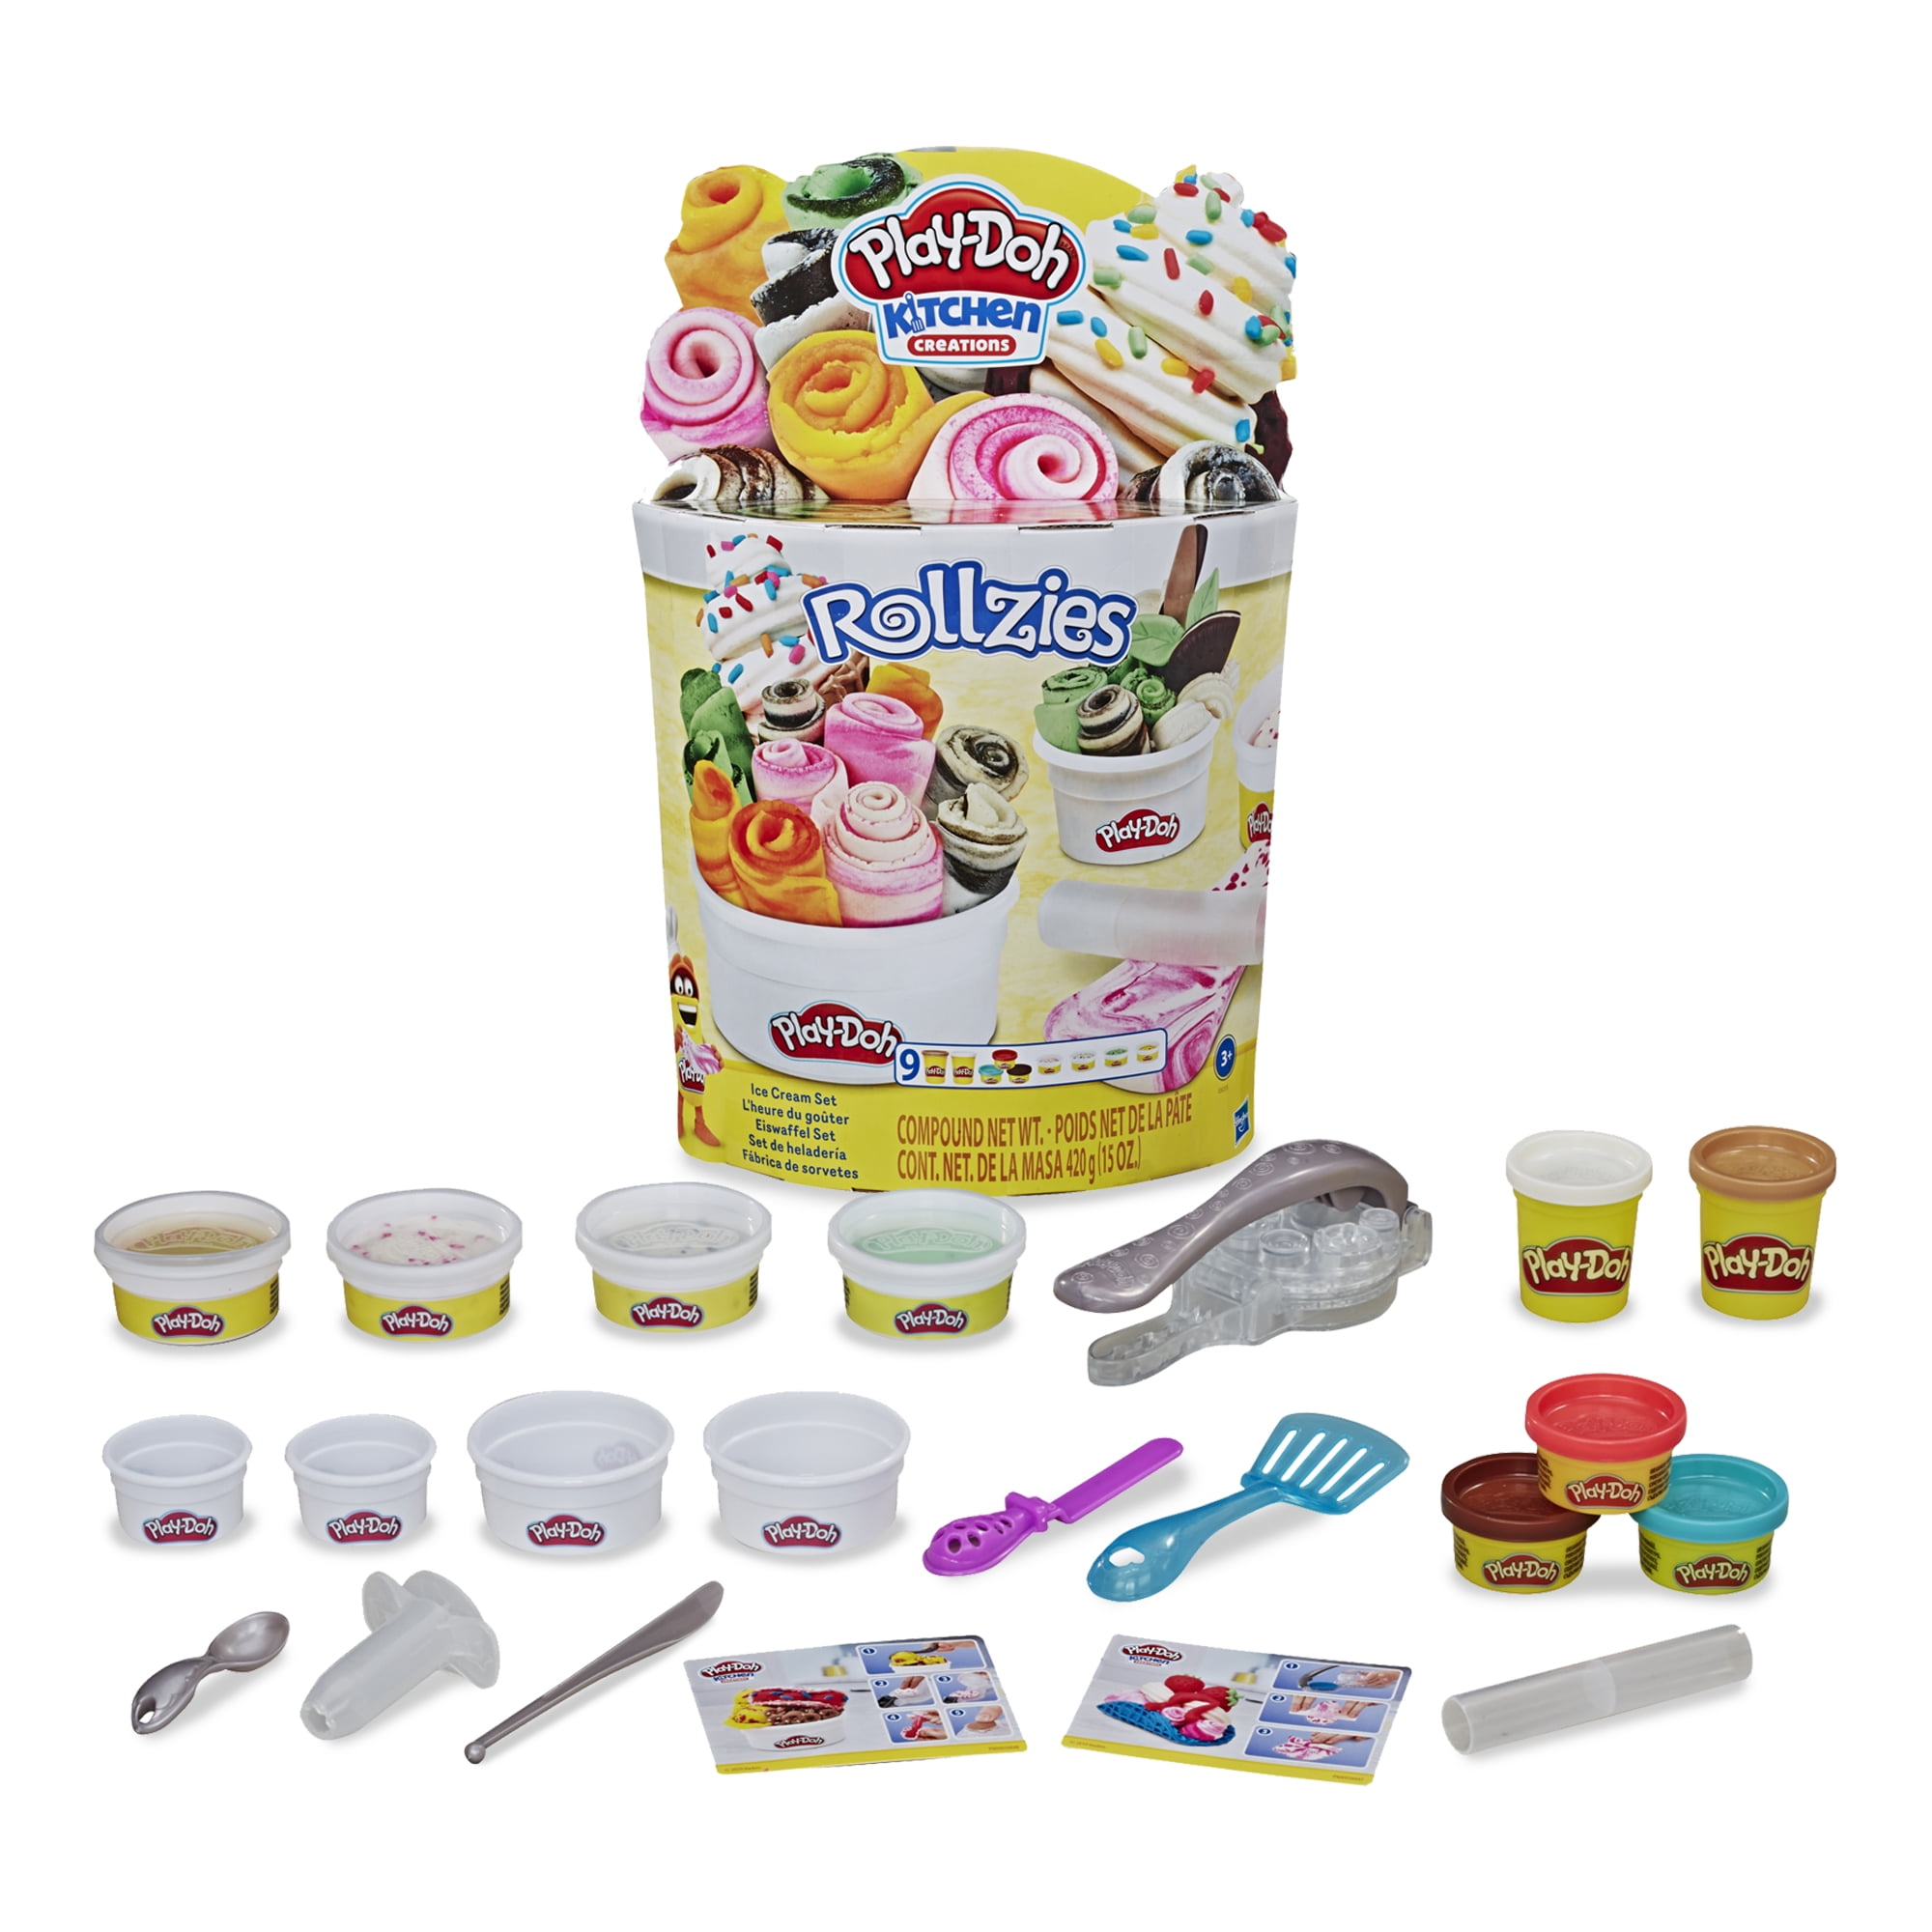 Play-Doh Kitchen Creations Rollzies Rolled Ice Cream Set with 4 Cans of Play-Doh Color Burst Compound Plus 5 Additional Non-Toxic Colors 